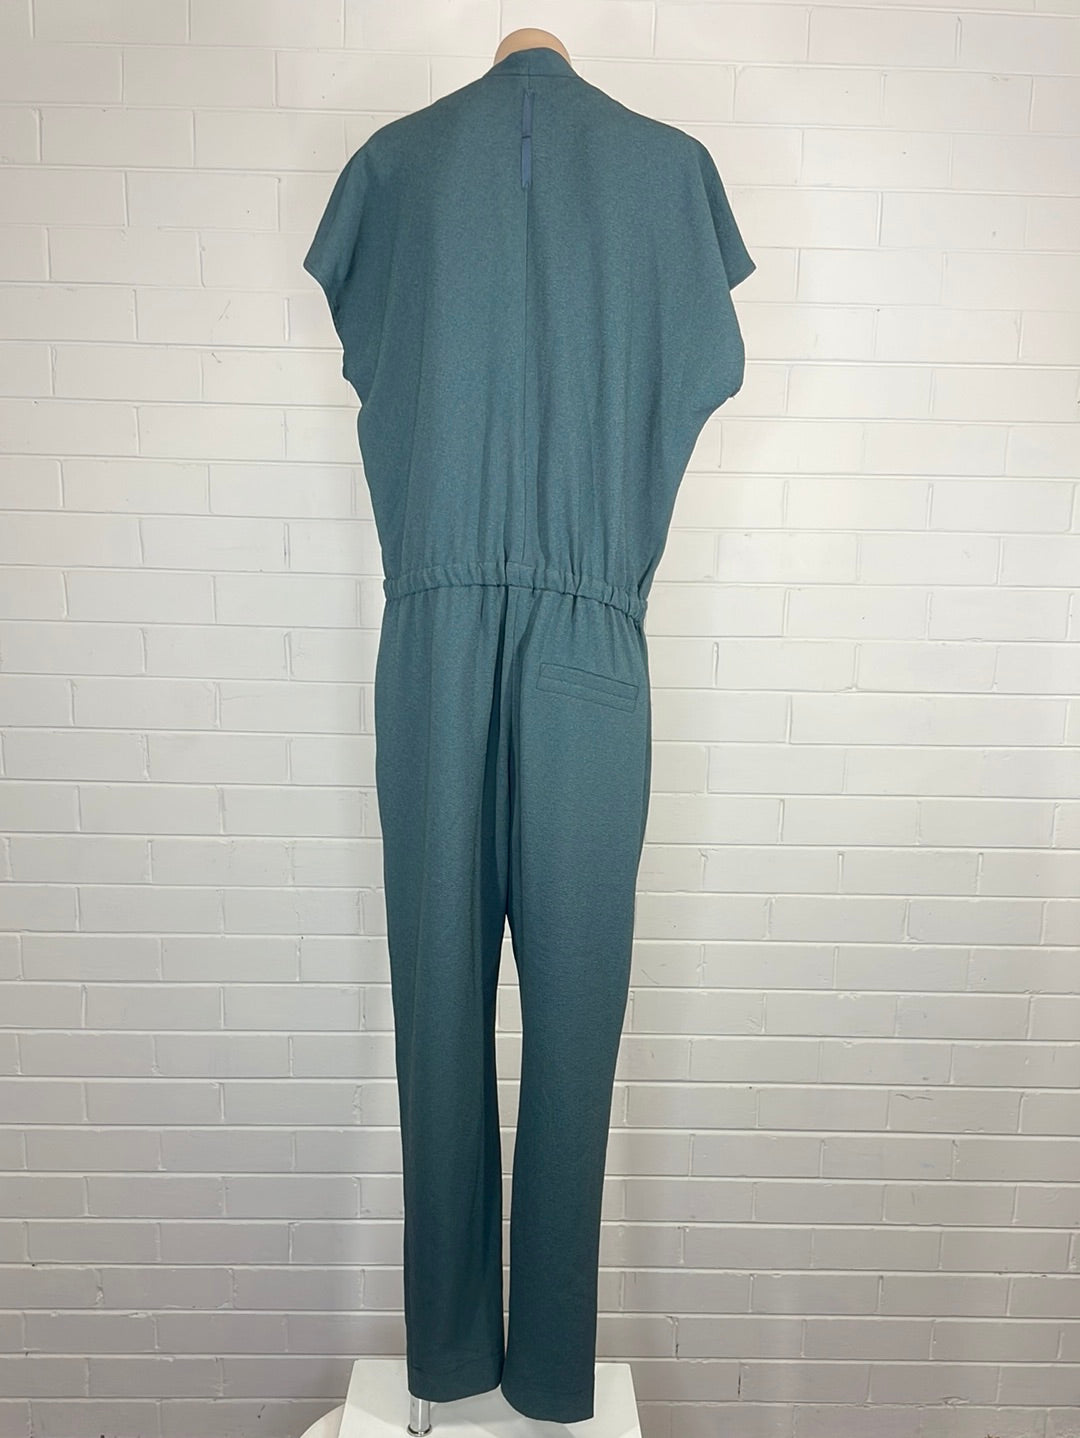 Noa Noa | Denmark | pantsuit | size 12 | tapered leg | new with tags